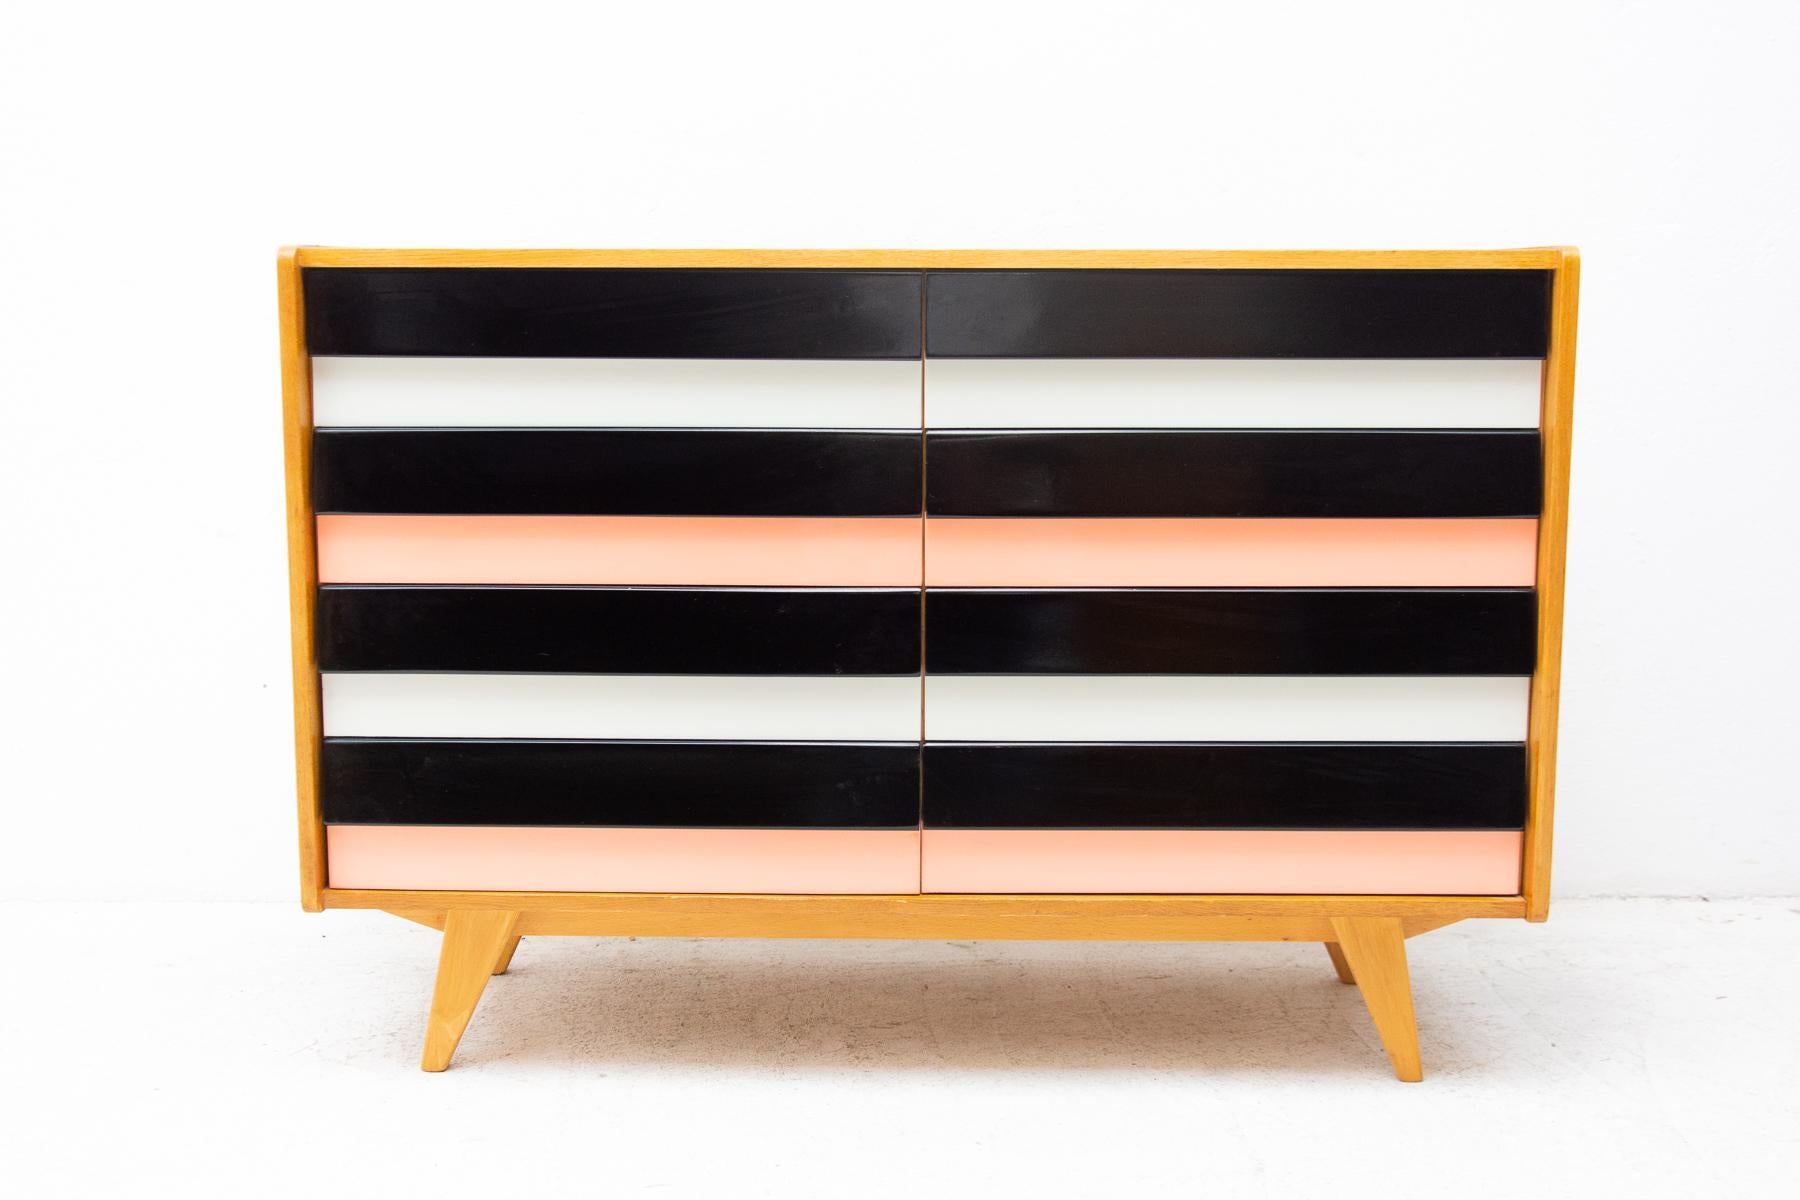 Modernist mahogany chest of drawers, model no. U-453, designed by Jirí Jiroutek for Interiér Praha. It was made in the former Czechoslovakia in the 1960´s. This model is associated with the world-famous EXPO 58 in Brussels. It features dark stained